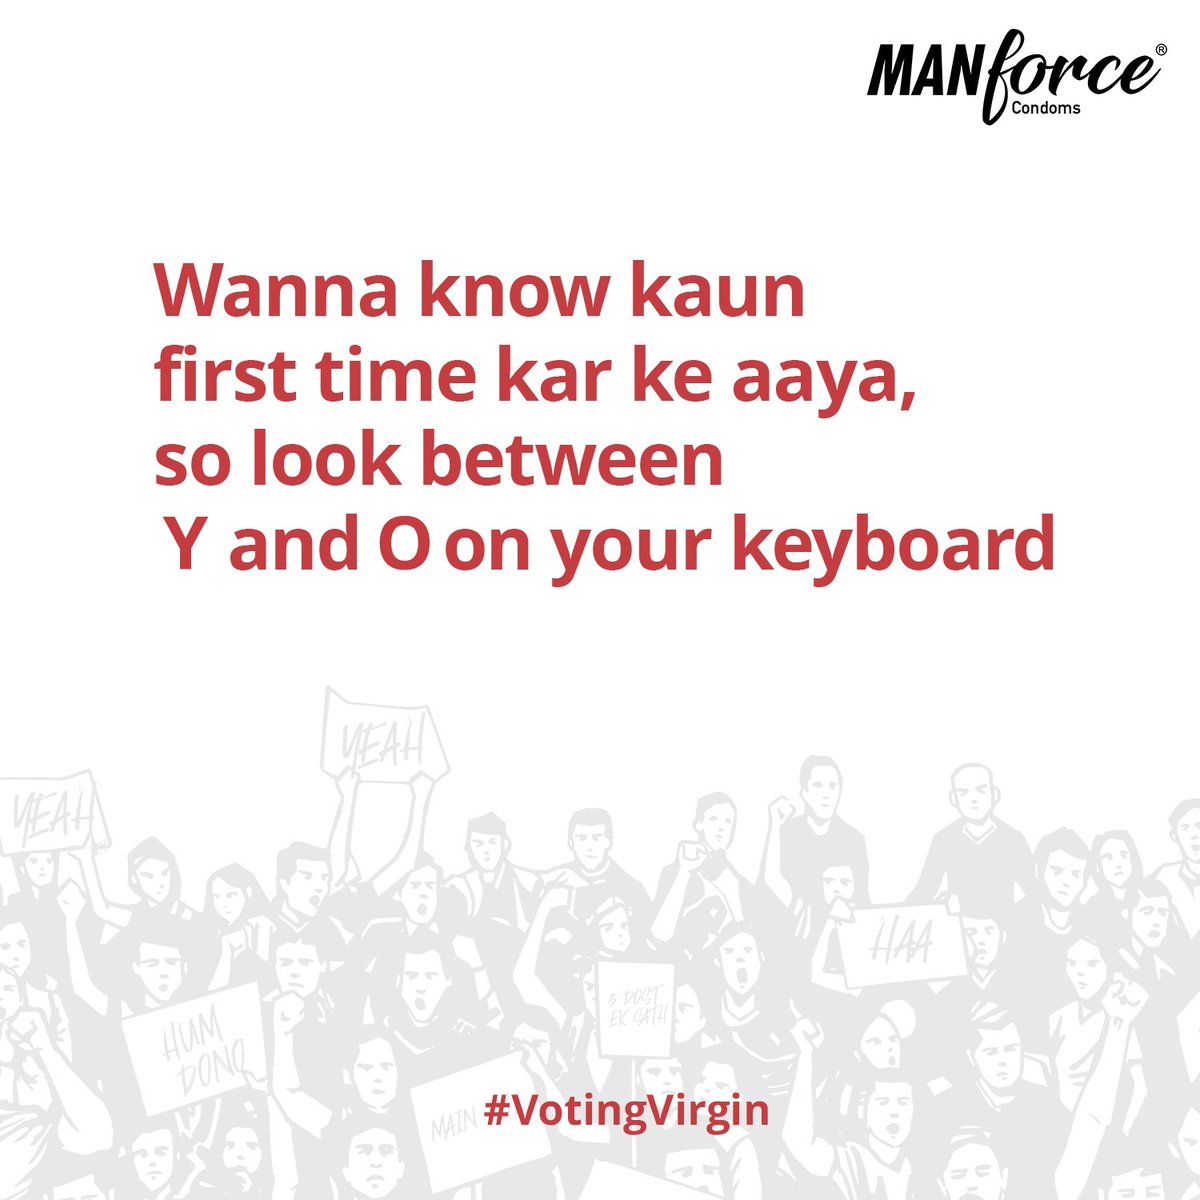 Guess who is not a #VotingVirgin now, look between Y and O on your keyboard

#VotingVirgin #Elections #Elections2024 #Moment #MomentMarketing #ManforceCondoms #FlavouredCondoms #KarKeAaya